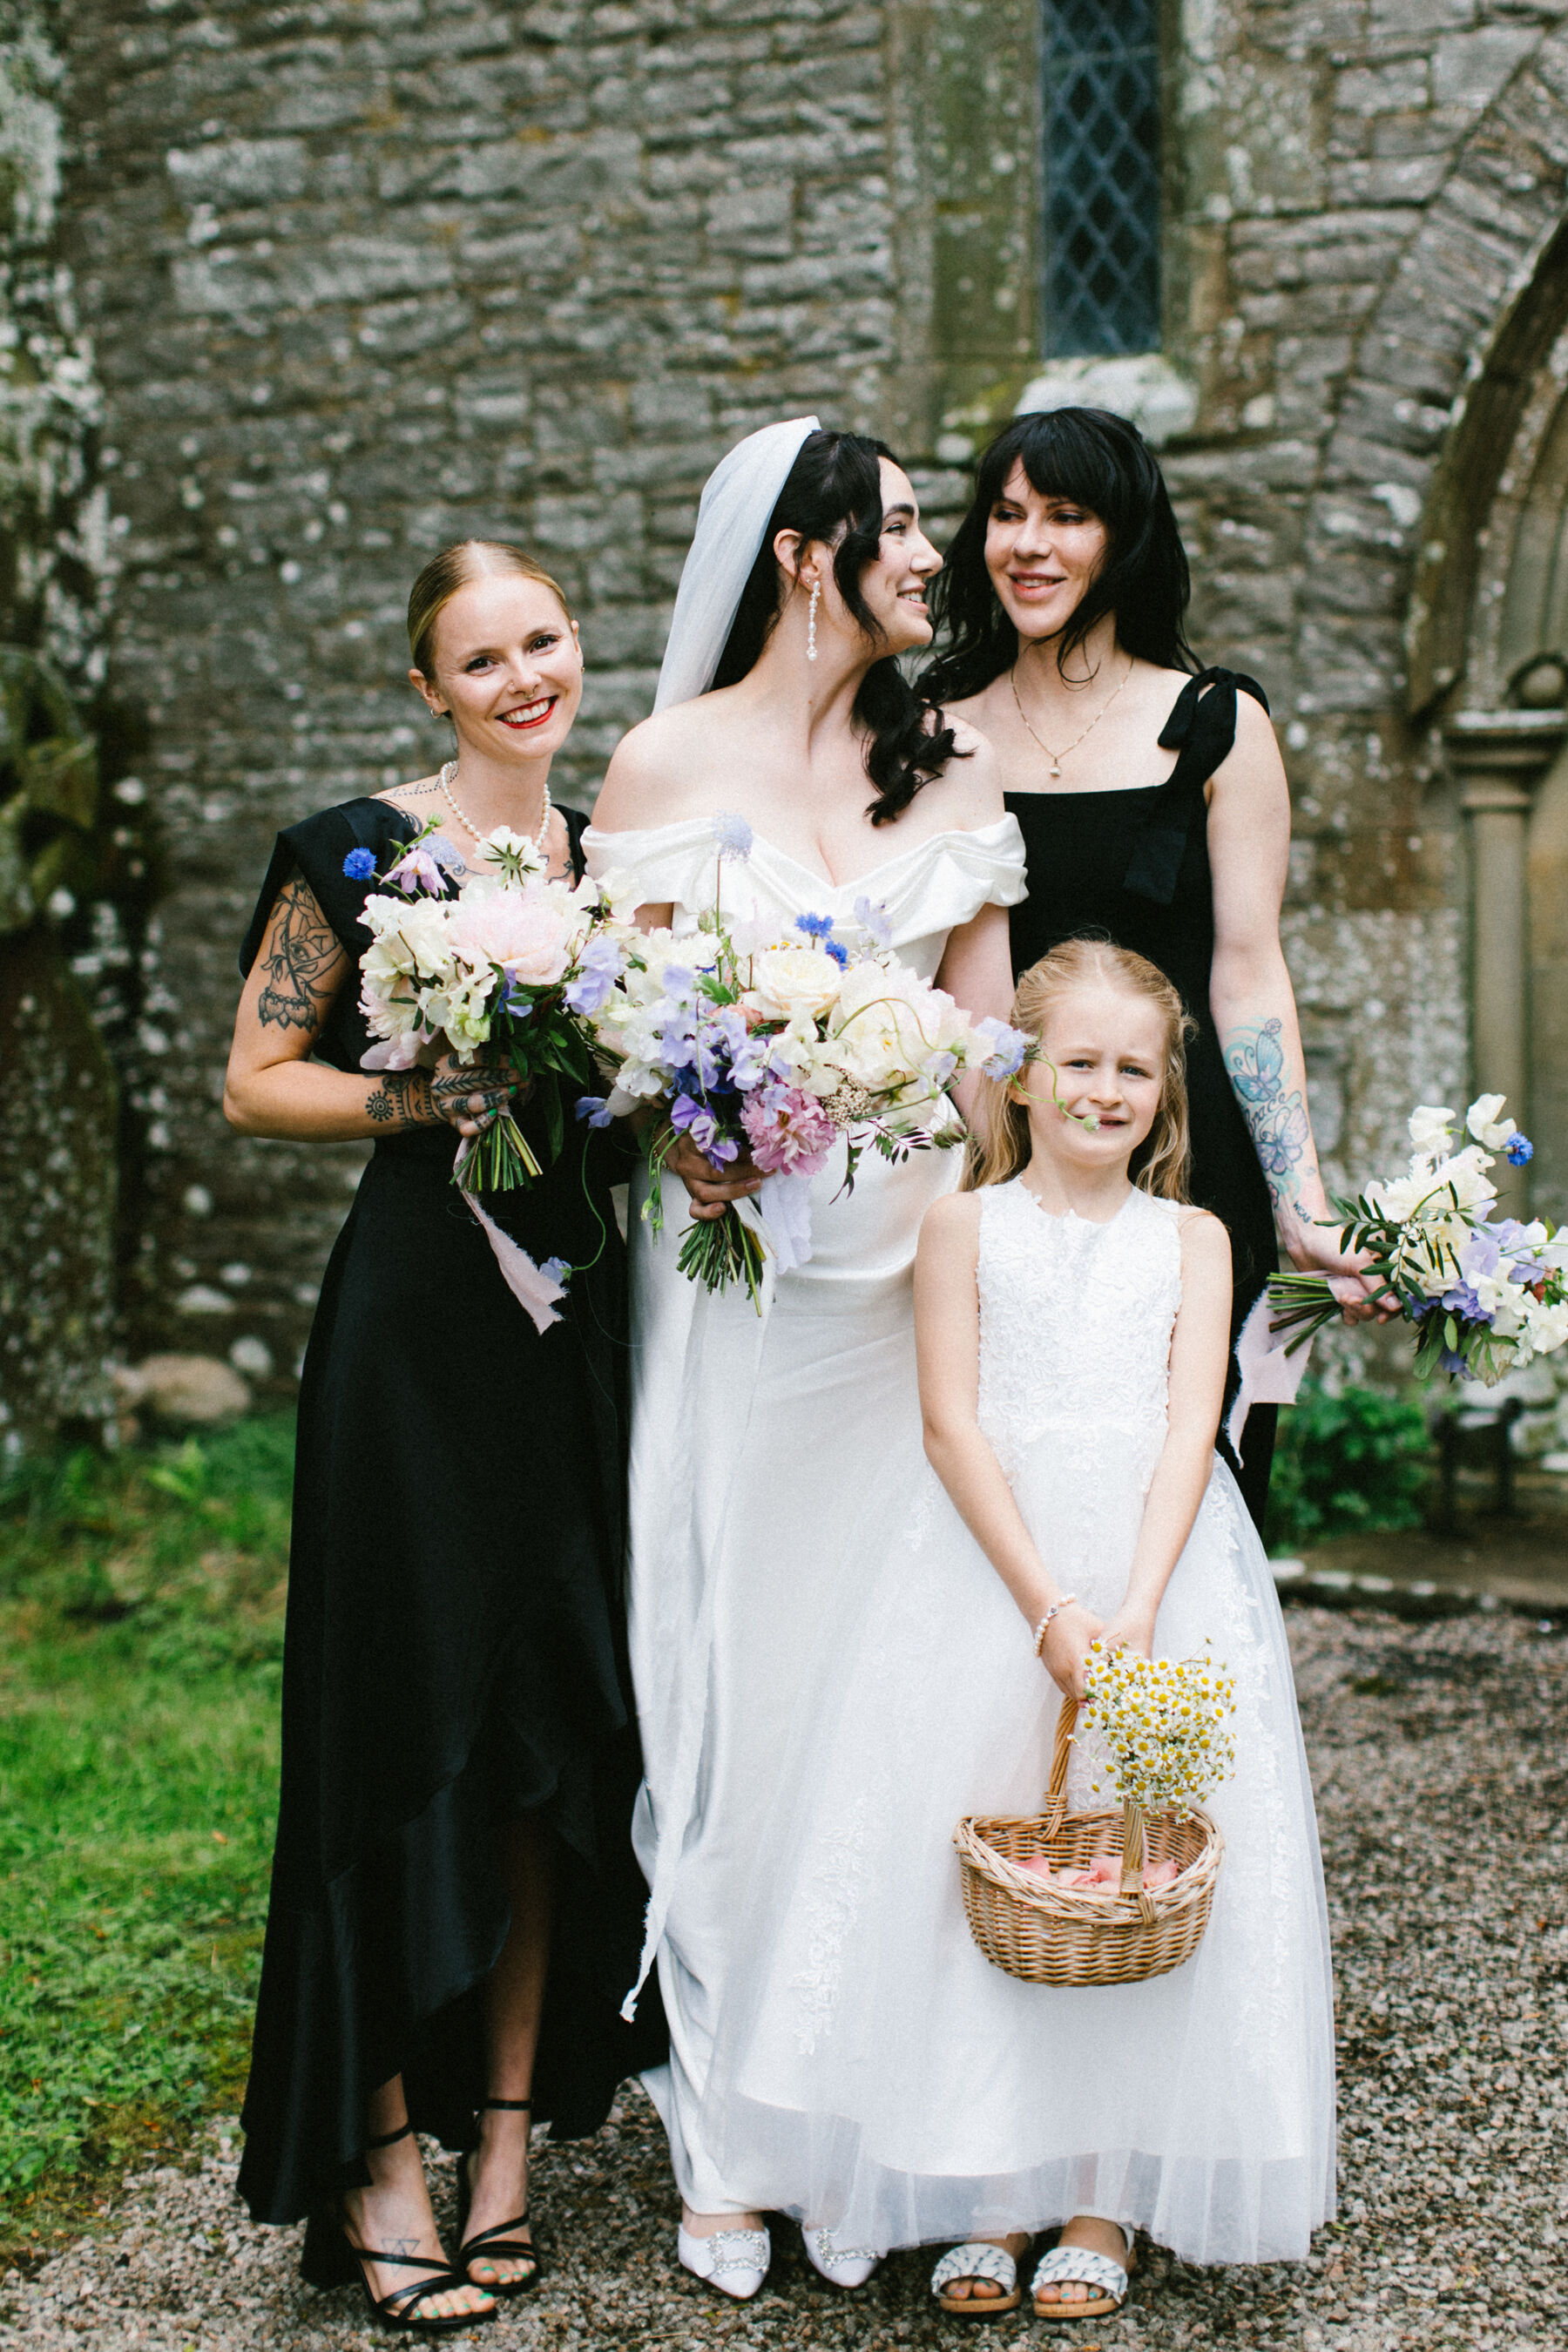 Bride in Vivienne Westwood wedding dress & bridesmaids in black dresses, each carrying elegant summer bouquets. Flowergirl carries a basket of confetti and a bouquet of chamomile.